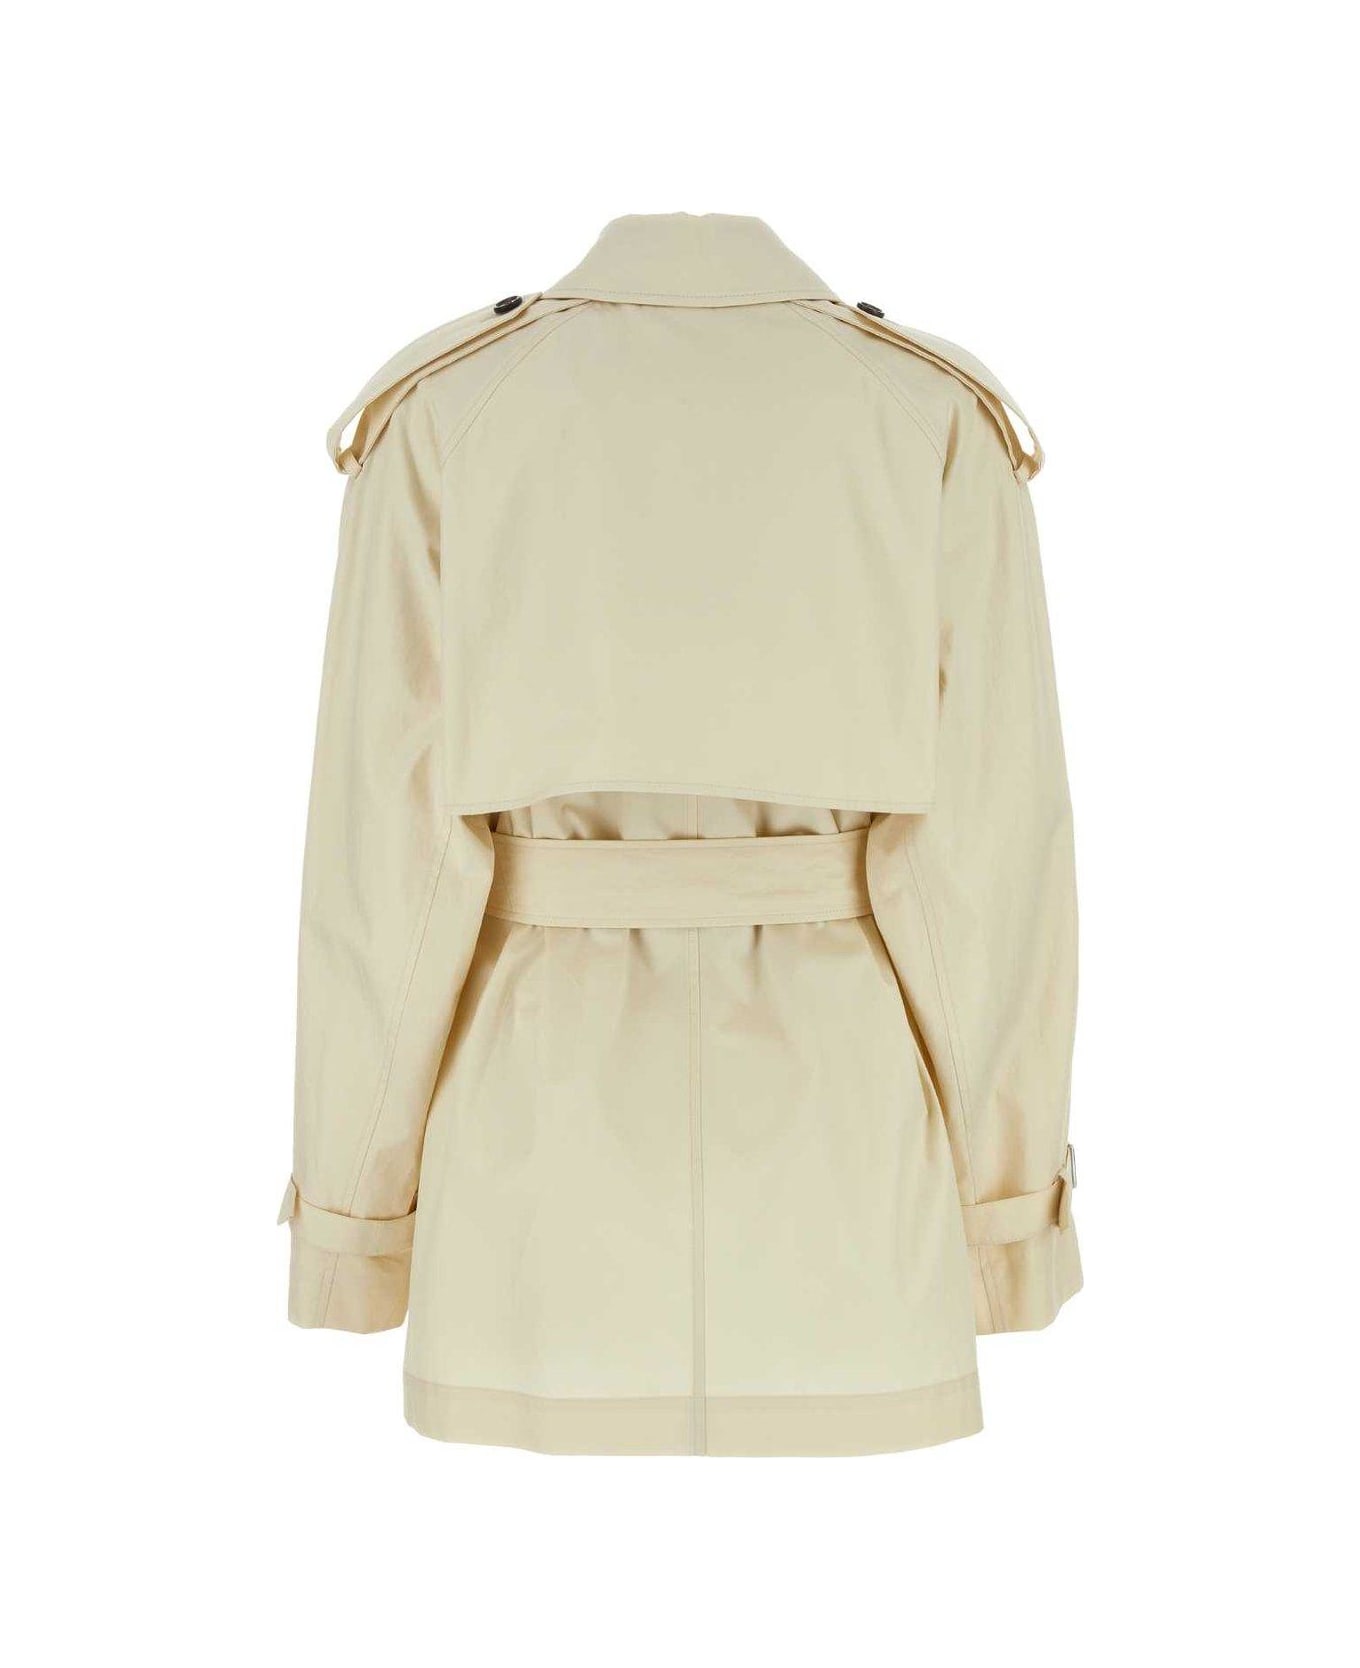 Burberry Double Breasted Belted Trench Coat - CALICO